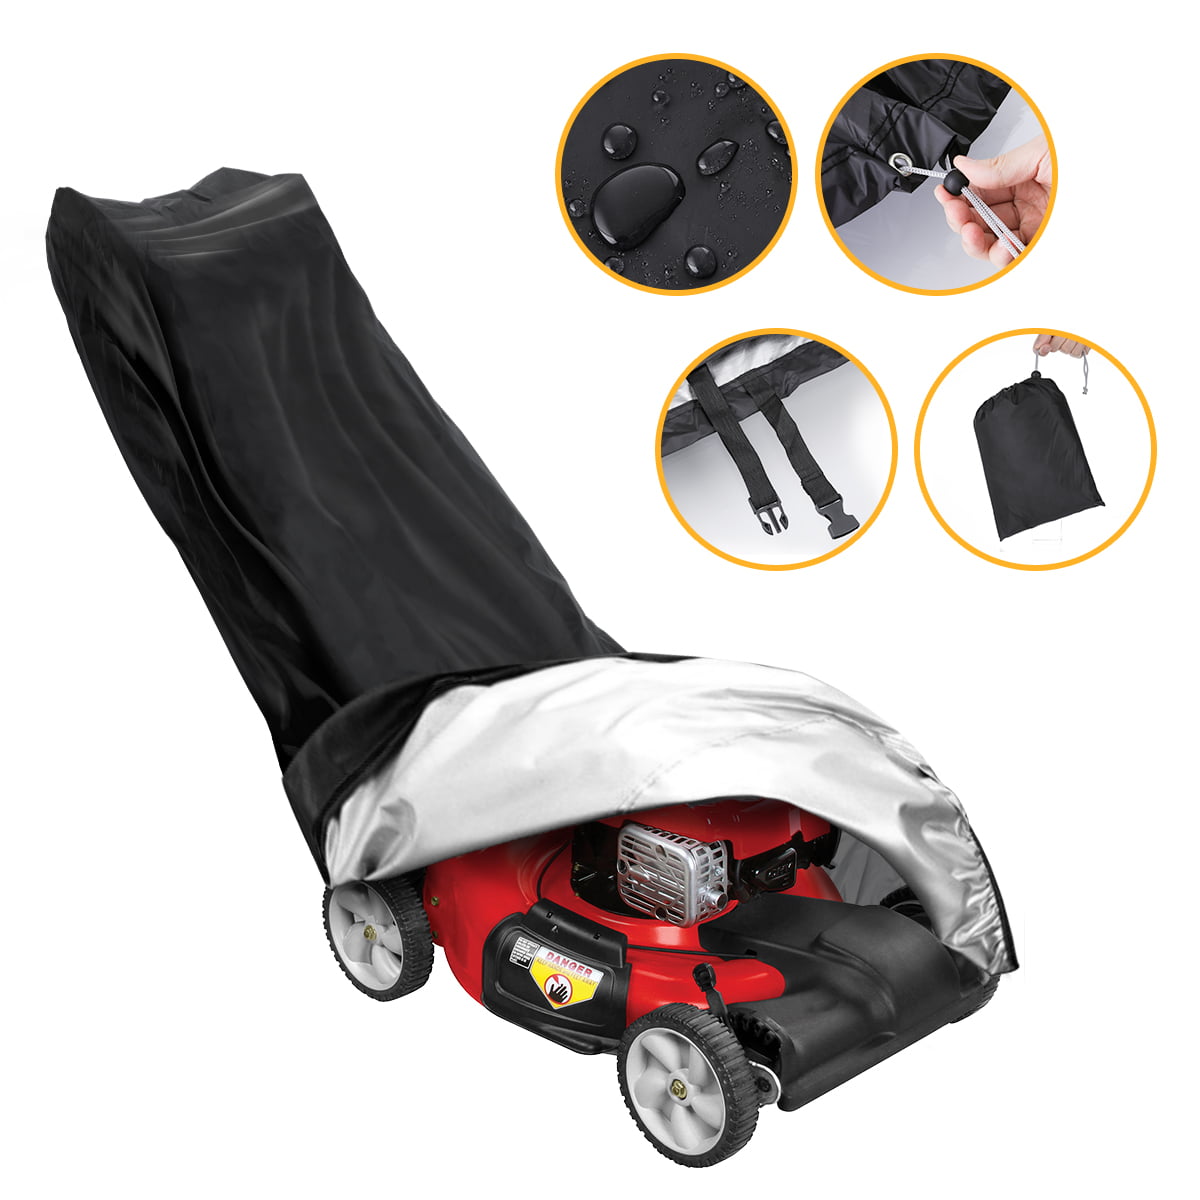 LIUHE Lawn Mower Cover Premium Oxford Waterproof Push Mower Cover UV Protection Snow Rain Wind Dust Water Birds,Universal Size with Drawstring,Storage Bag and Buckle 